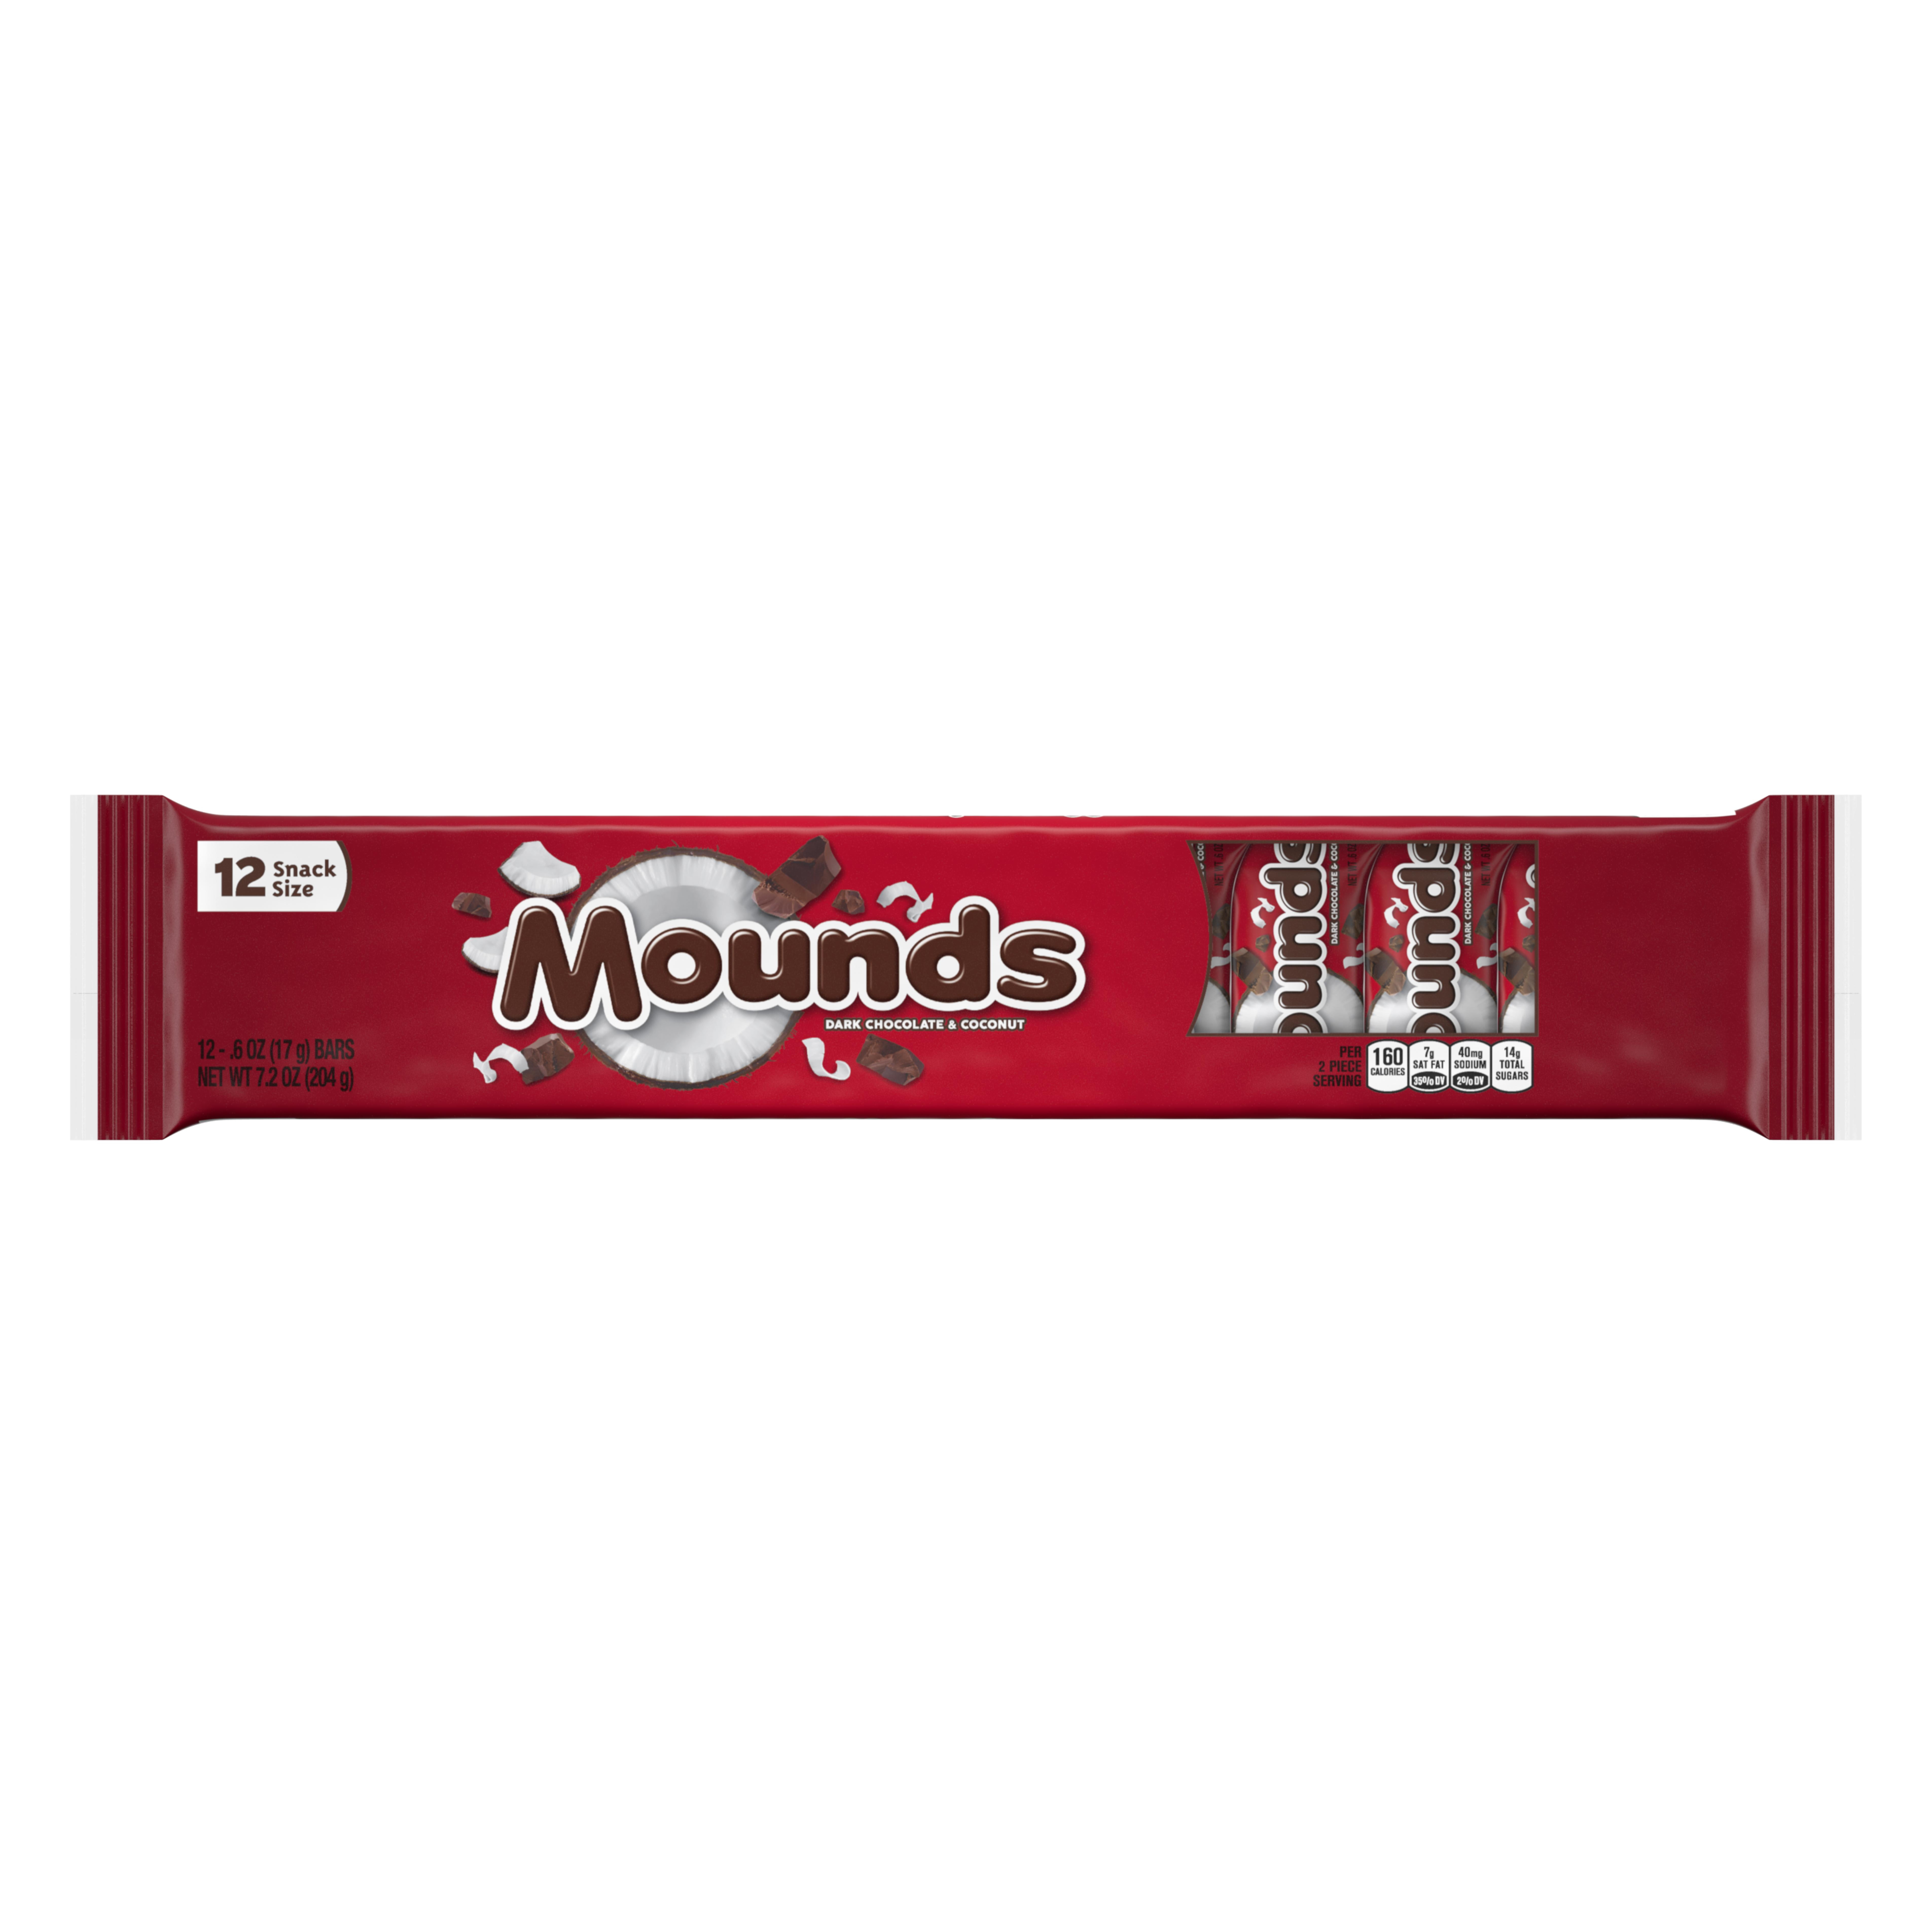 Mounds, Snack Size Dark Chocolate & Coconut Candy Bars, 7.2 Oz., 12 Count